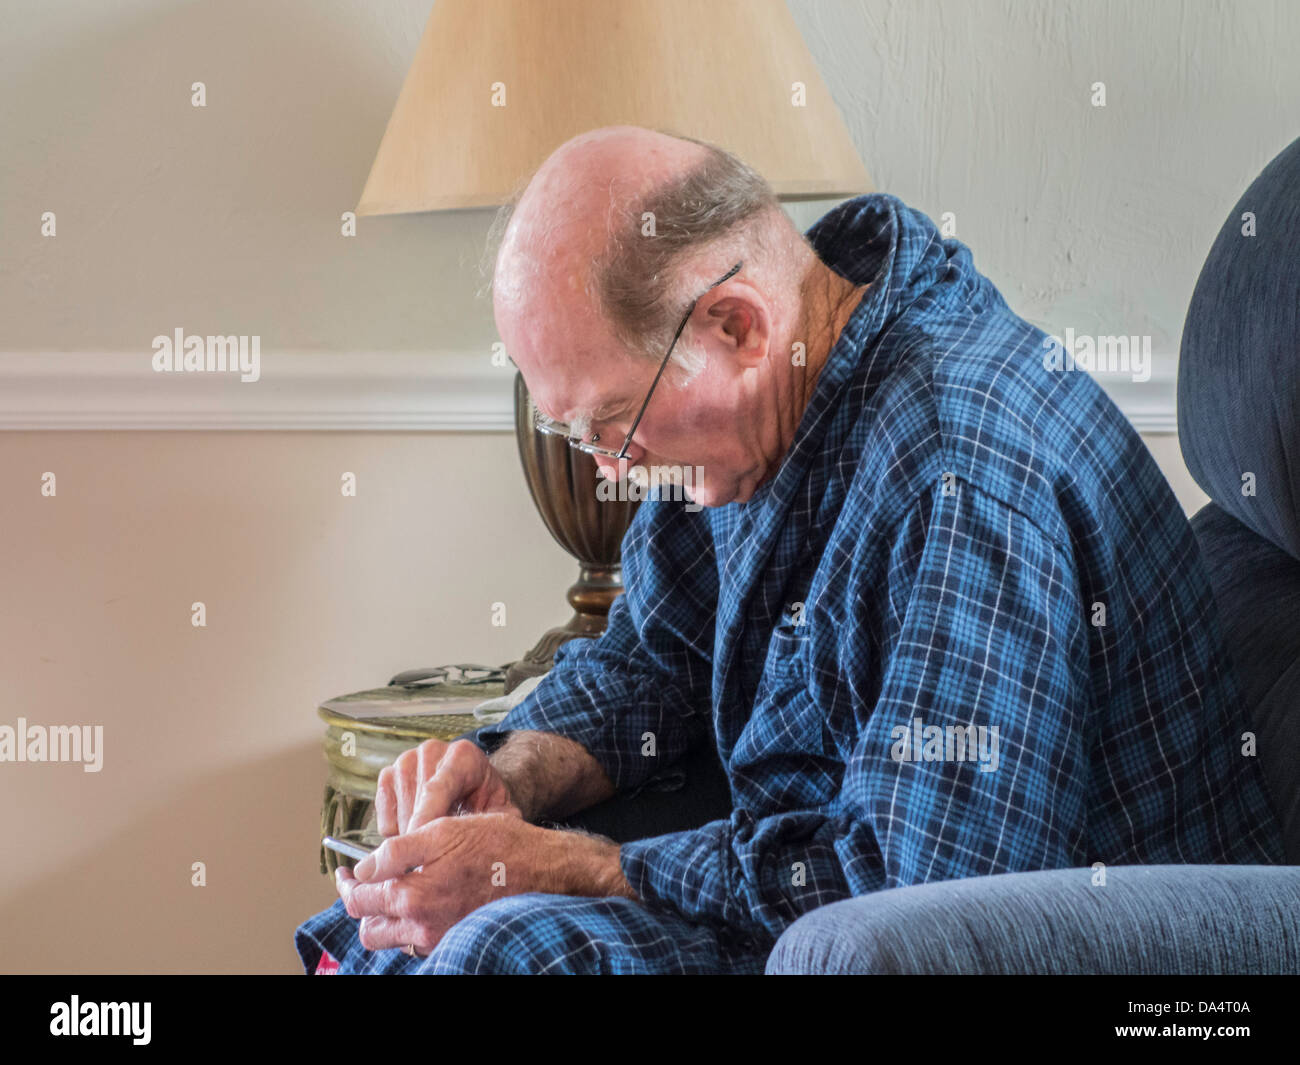 A 75 year old man with Alzheimer's struggles with the settings of his cell phone. USA. Stock Photo